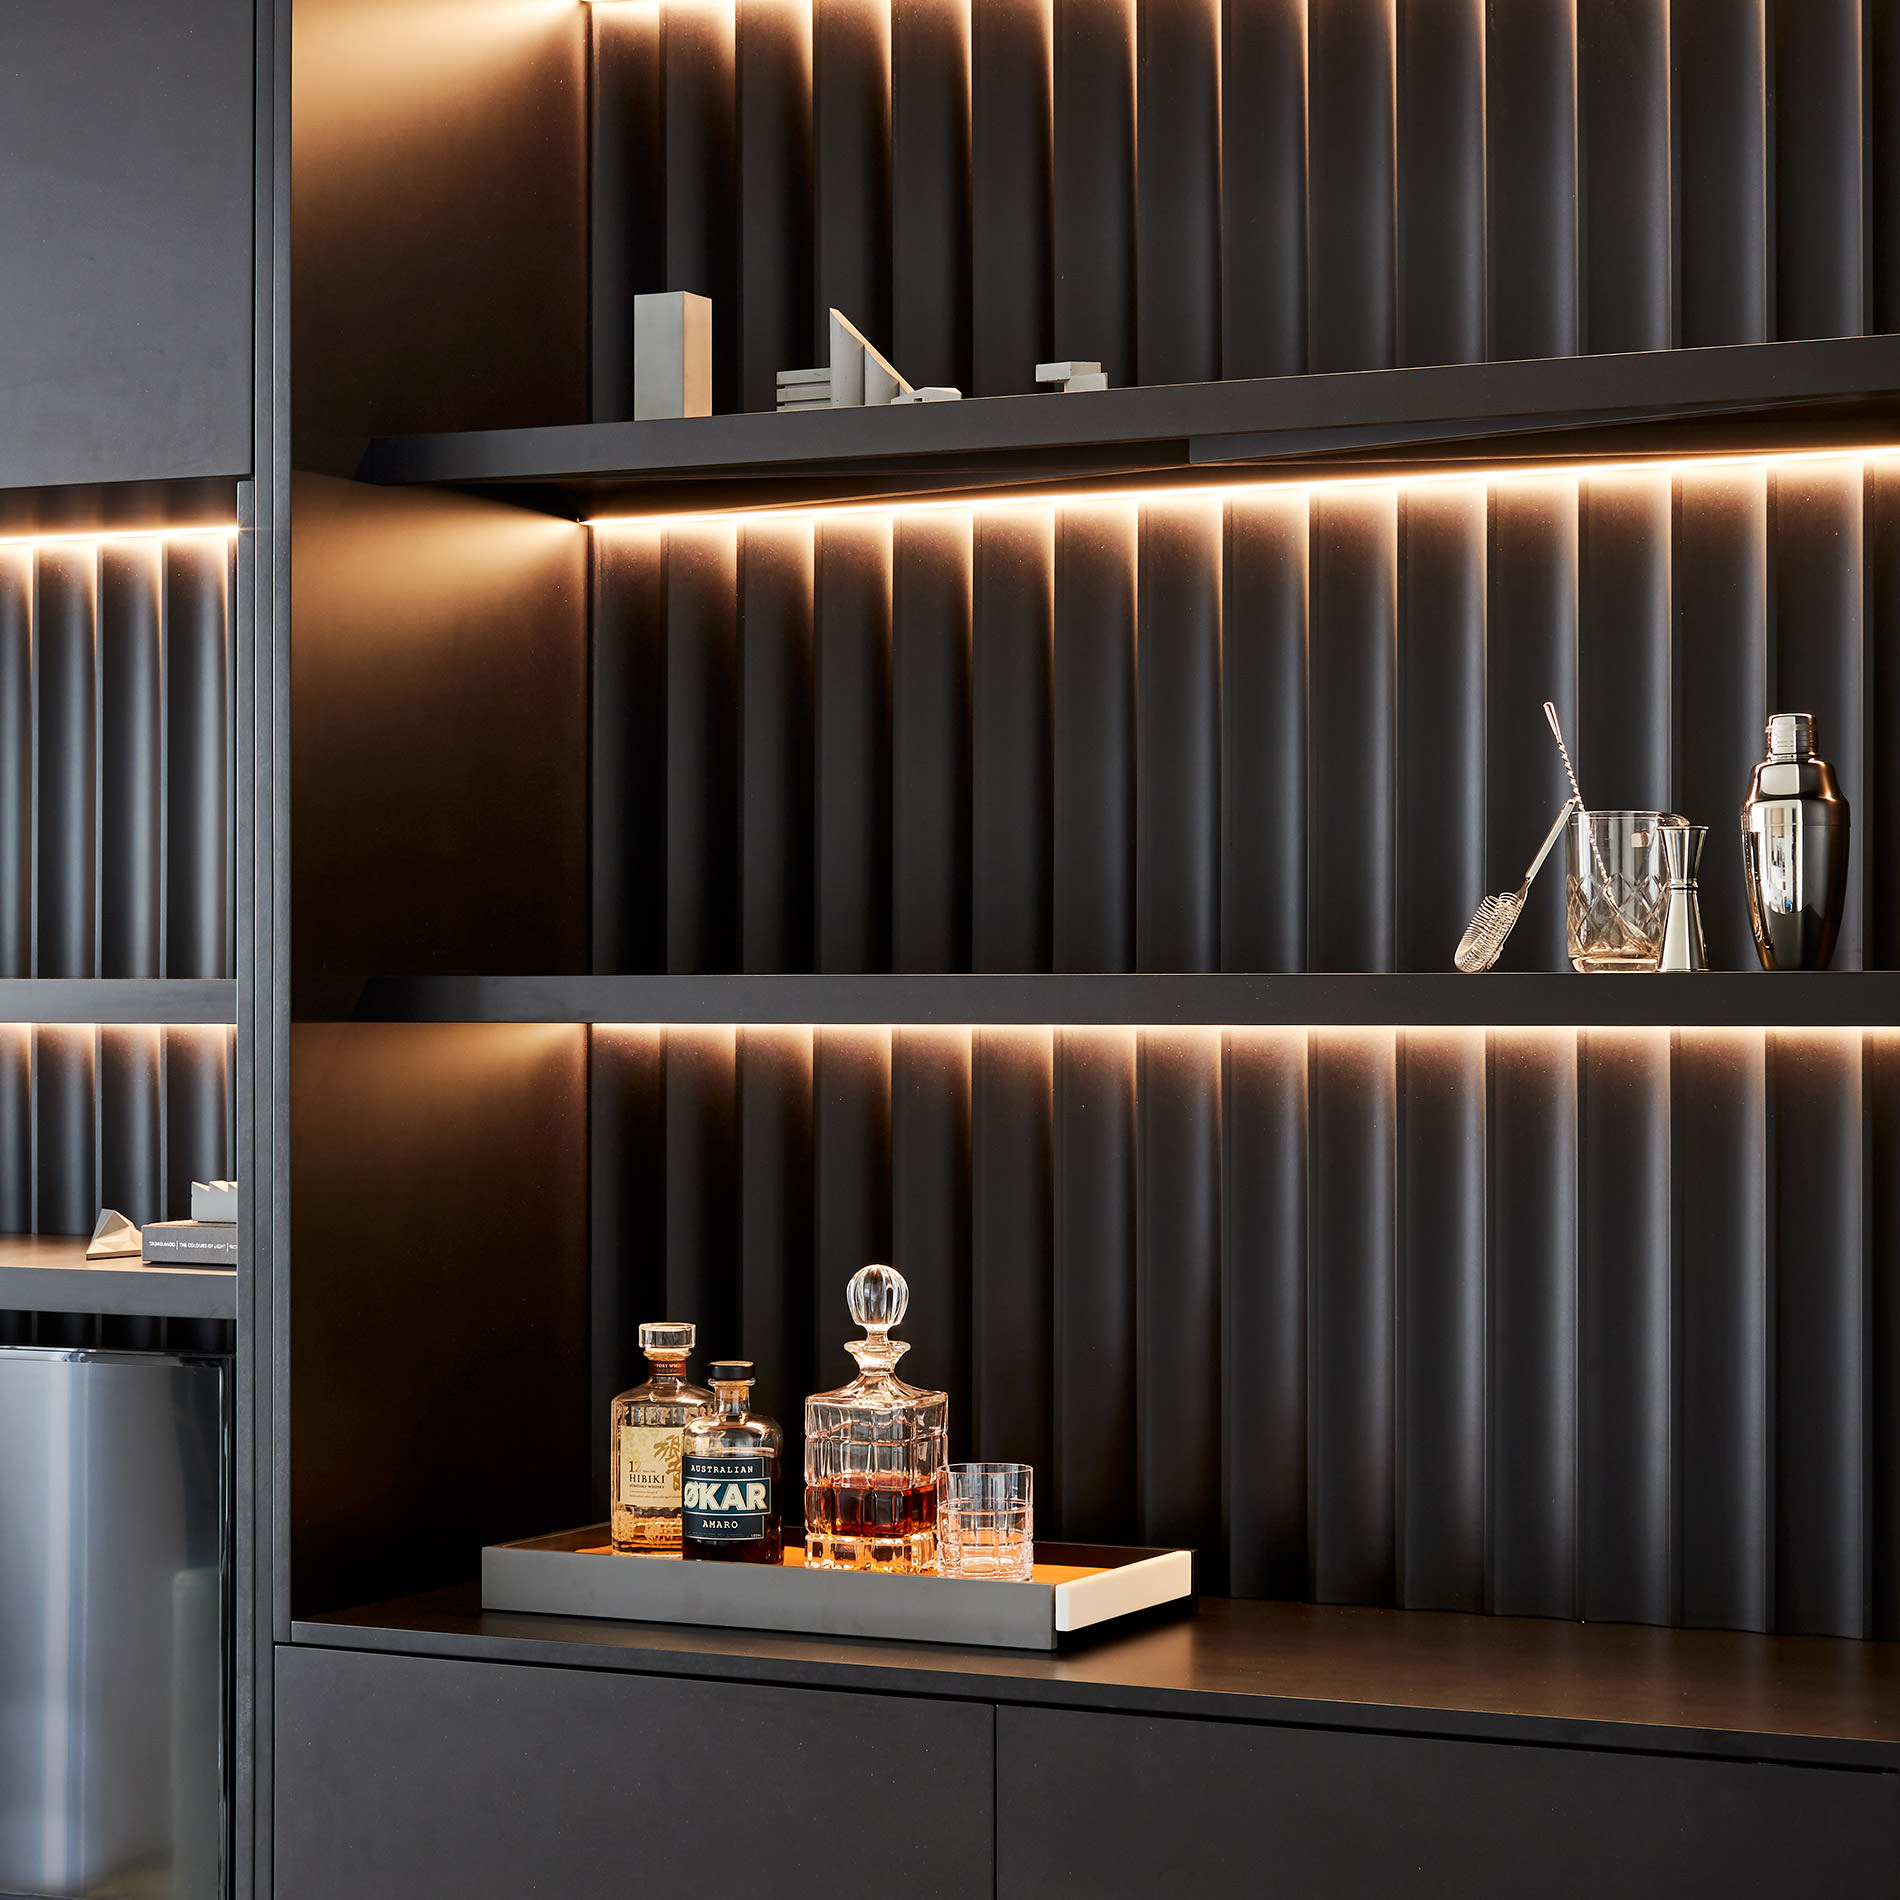 everybody loves a place to relax and this clever drinks cabinet by Australian designer FrancoCrea is a wonderfully luxurious example